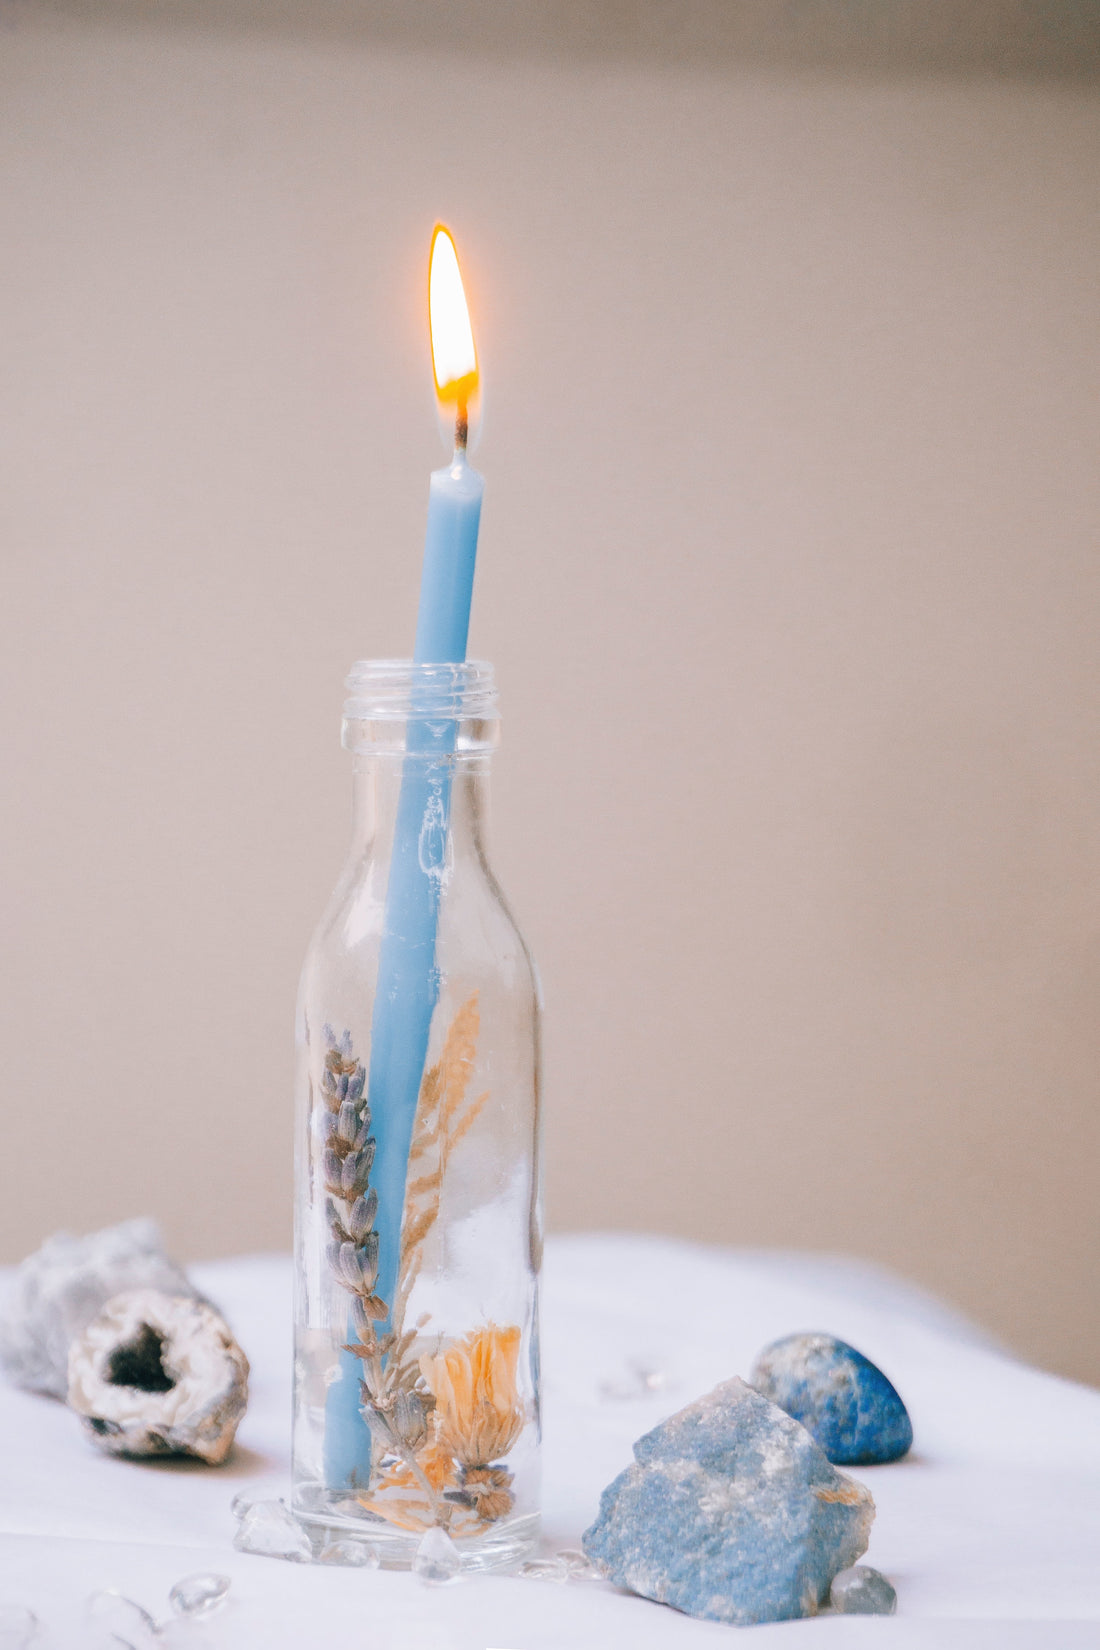 How to Use Your Reiki-Infused Intention Candle for Self-Care